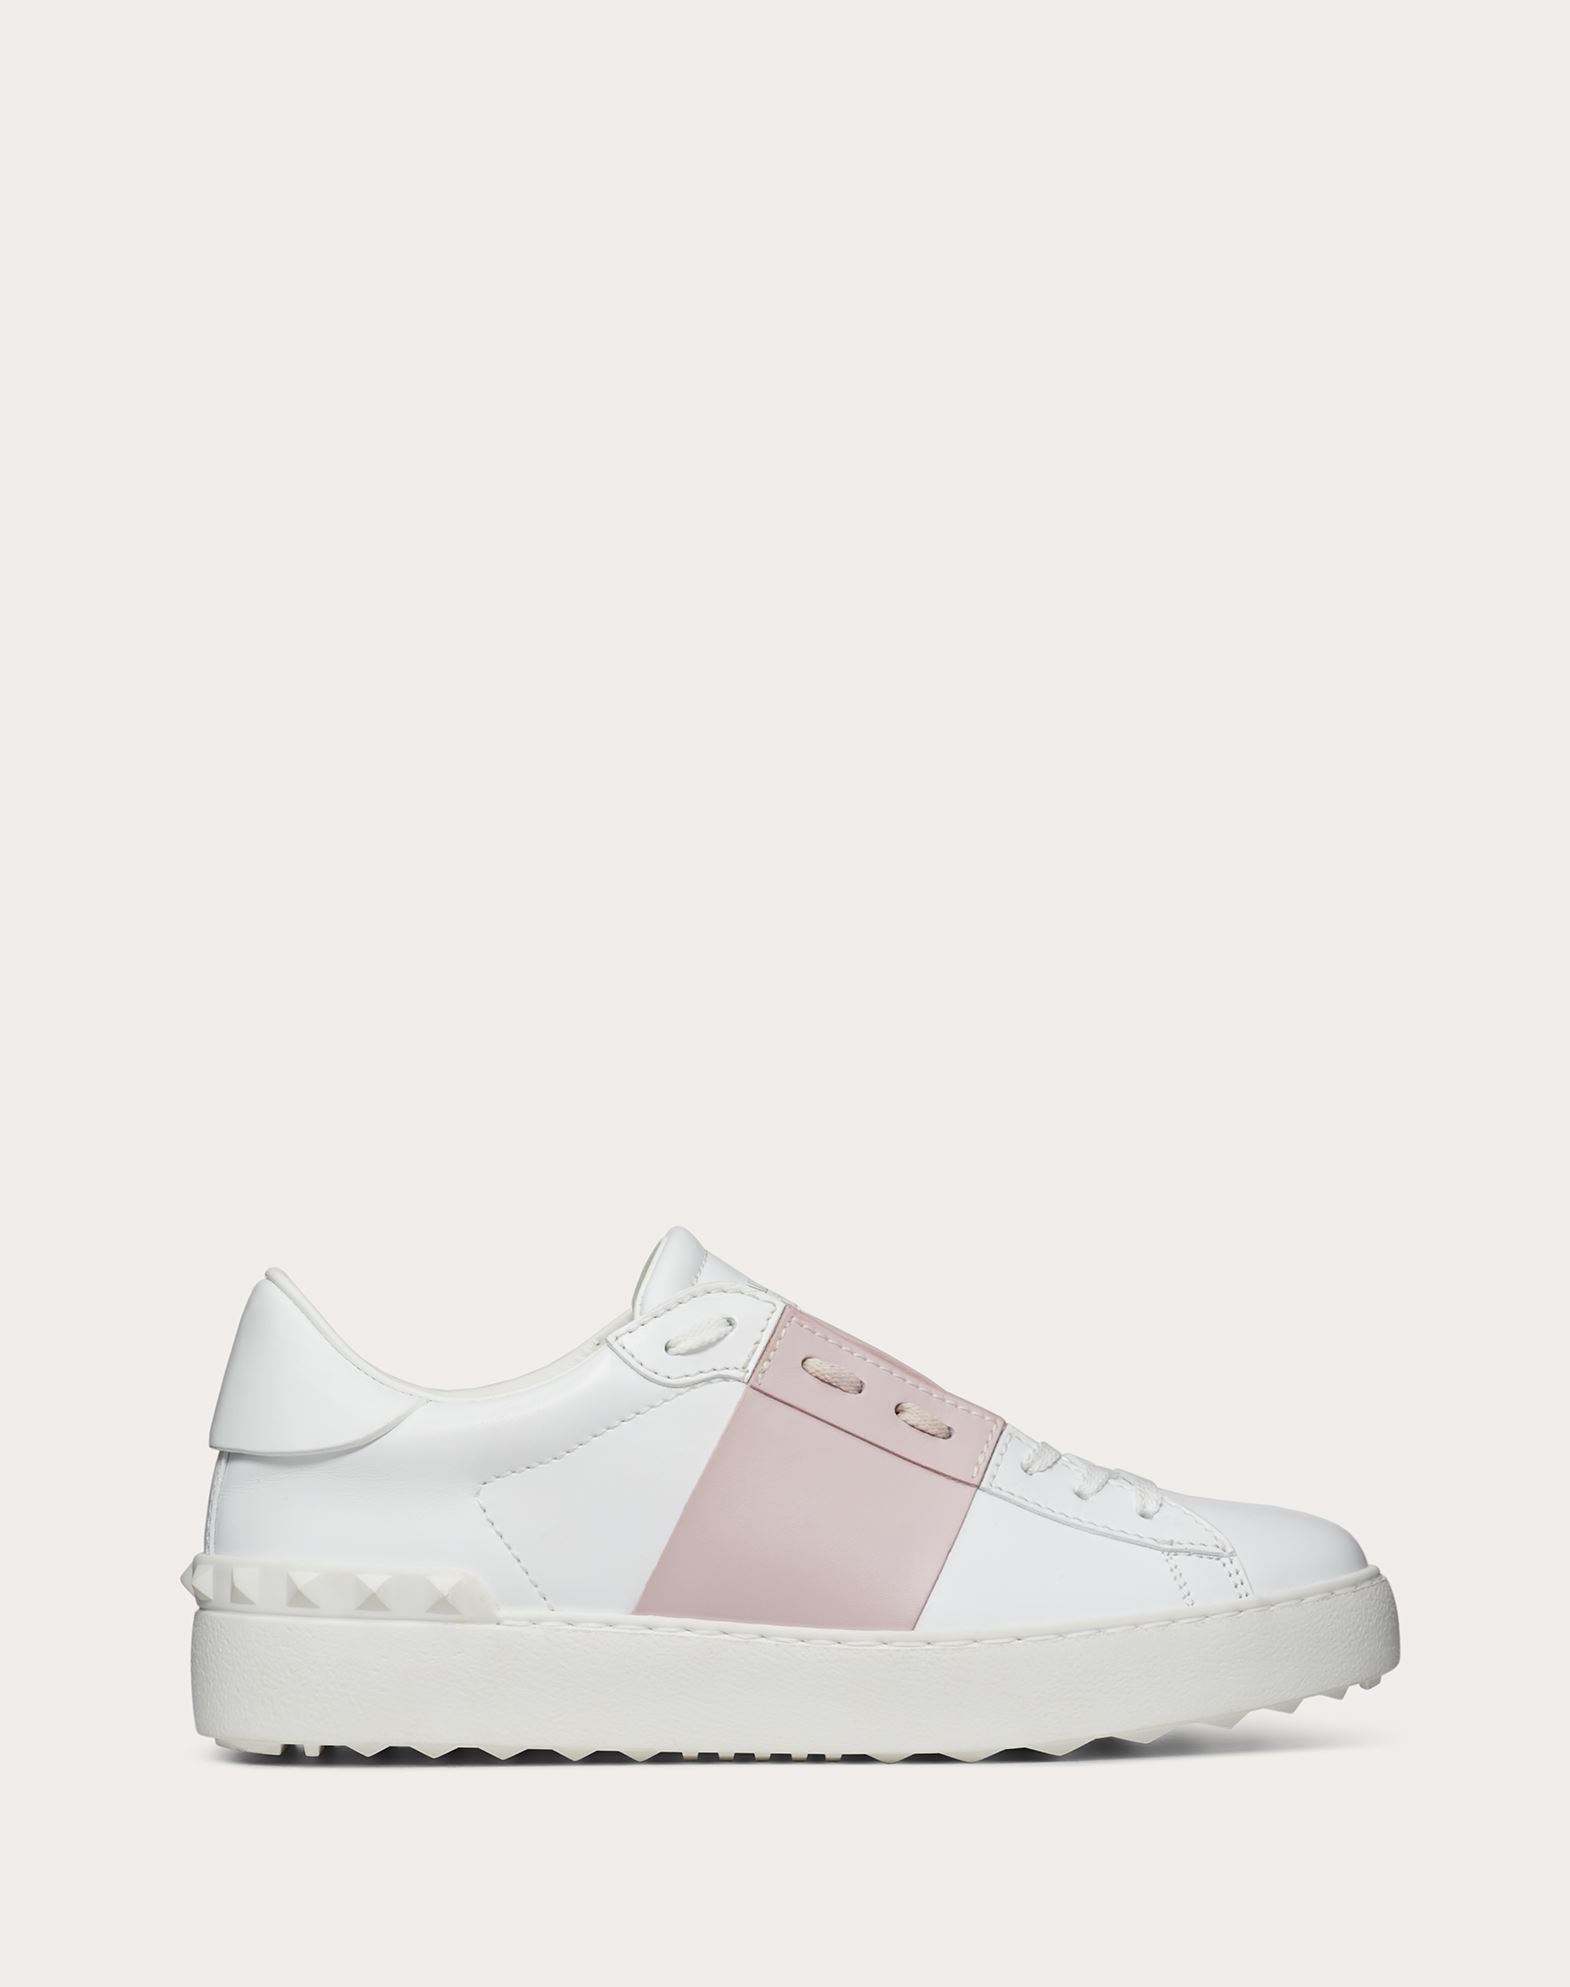 knop Samengroeiing Symposium Open Sneaker in Calfskin Leather for Woman | Valentino Online Boutique